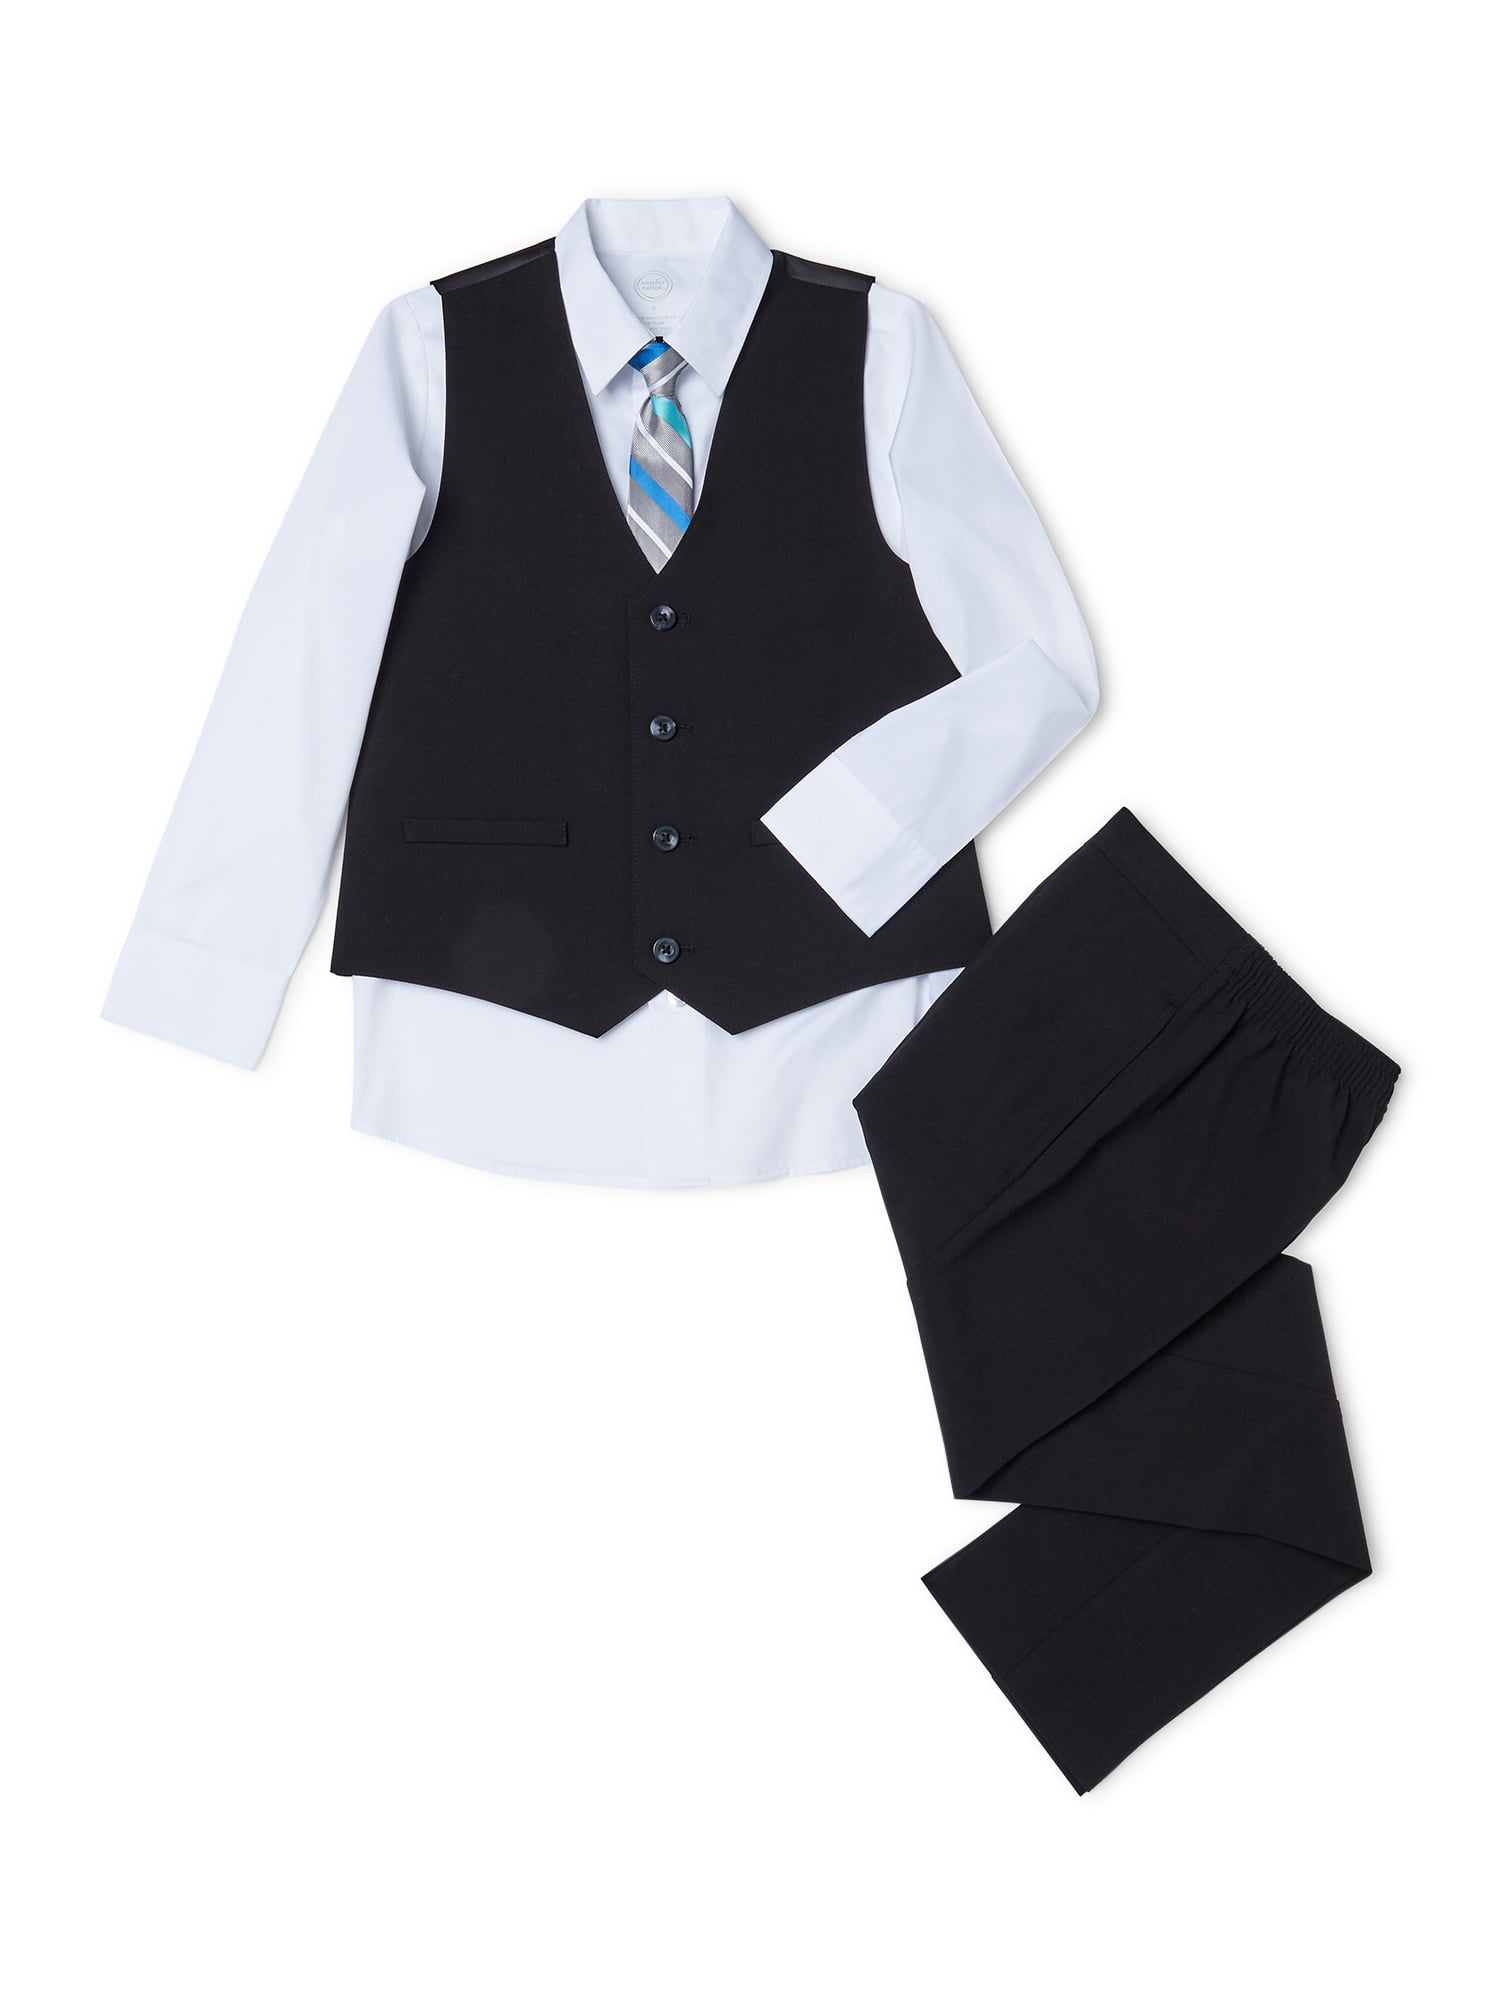 Bow Tie Sets Toddler Boy Tuxedos Outfits 2-7 Years Vest Nwada Boys Summer Dress Clothes Short Sleeve Shirt Shorts